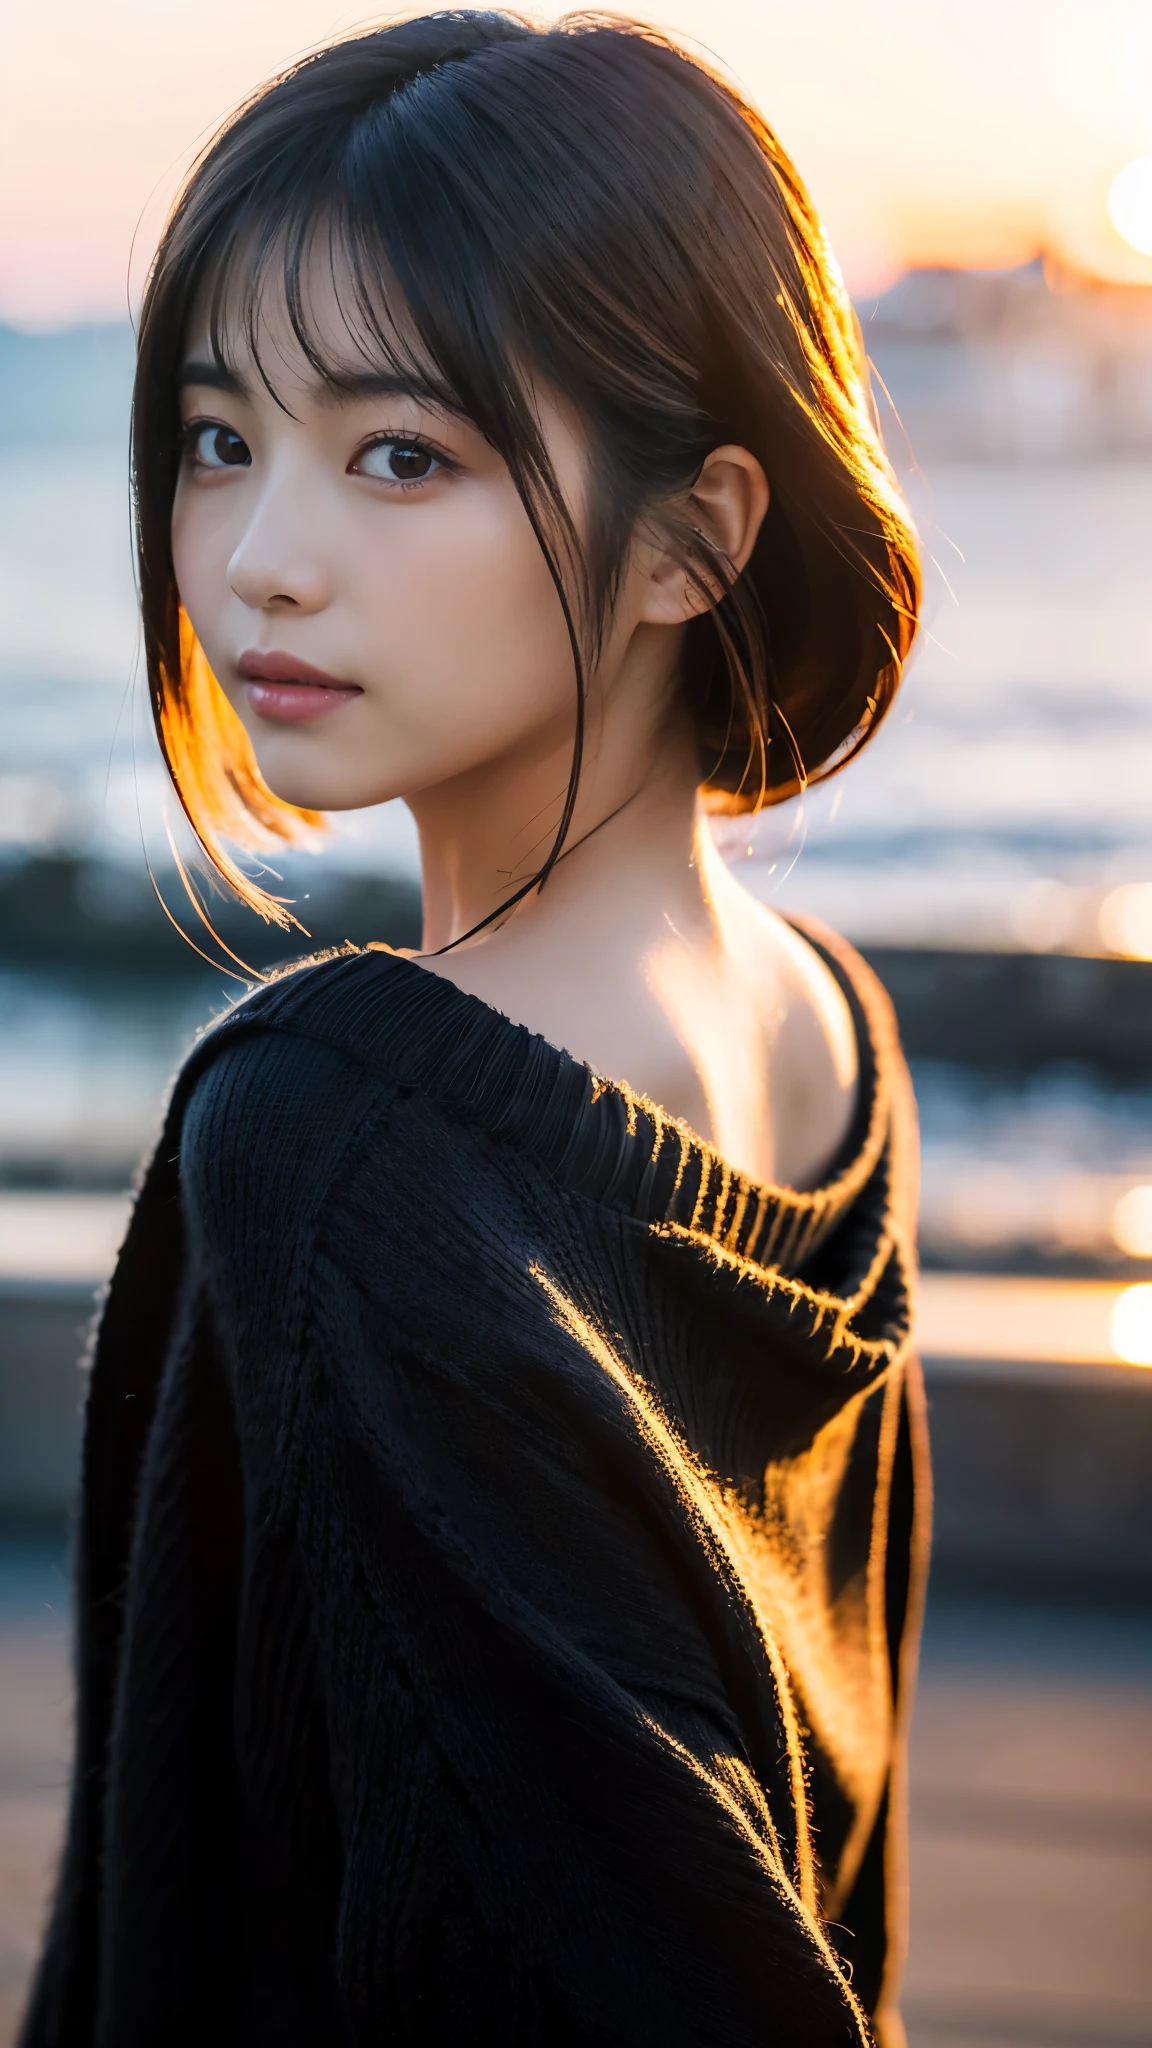 (masterpiece:1.2),(Highest quality),(Very detailed:1.2),(High resolution),(Photorealistic Stick),(RAW Photos),8K,Close-up of a woman in a black sweater,Soft portrait shots,Beautiful Japanese Women,Gorgeous face portrait,Eye light,Girl of the person himself,Very beautiful face,Beautiful portrait,A lovely and delicate face,Beautiful young Japanese woman,Mature hairstyle,look back(Sunset in the background),(((Blur the background))),(Gentle light),(Over the shoulder),(POV shot),((Dynamic hair movement:1.2))